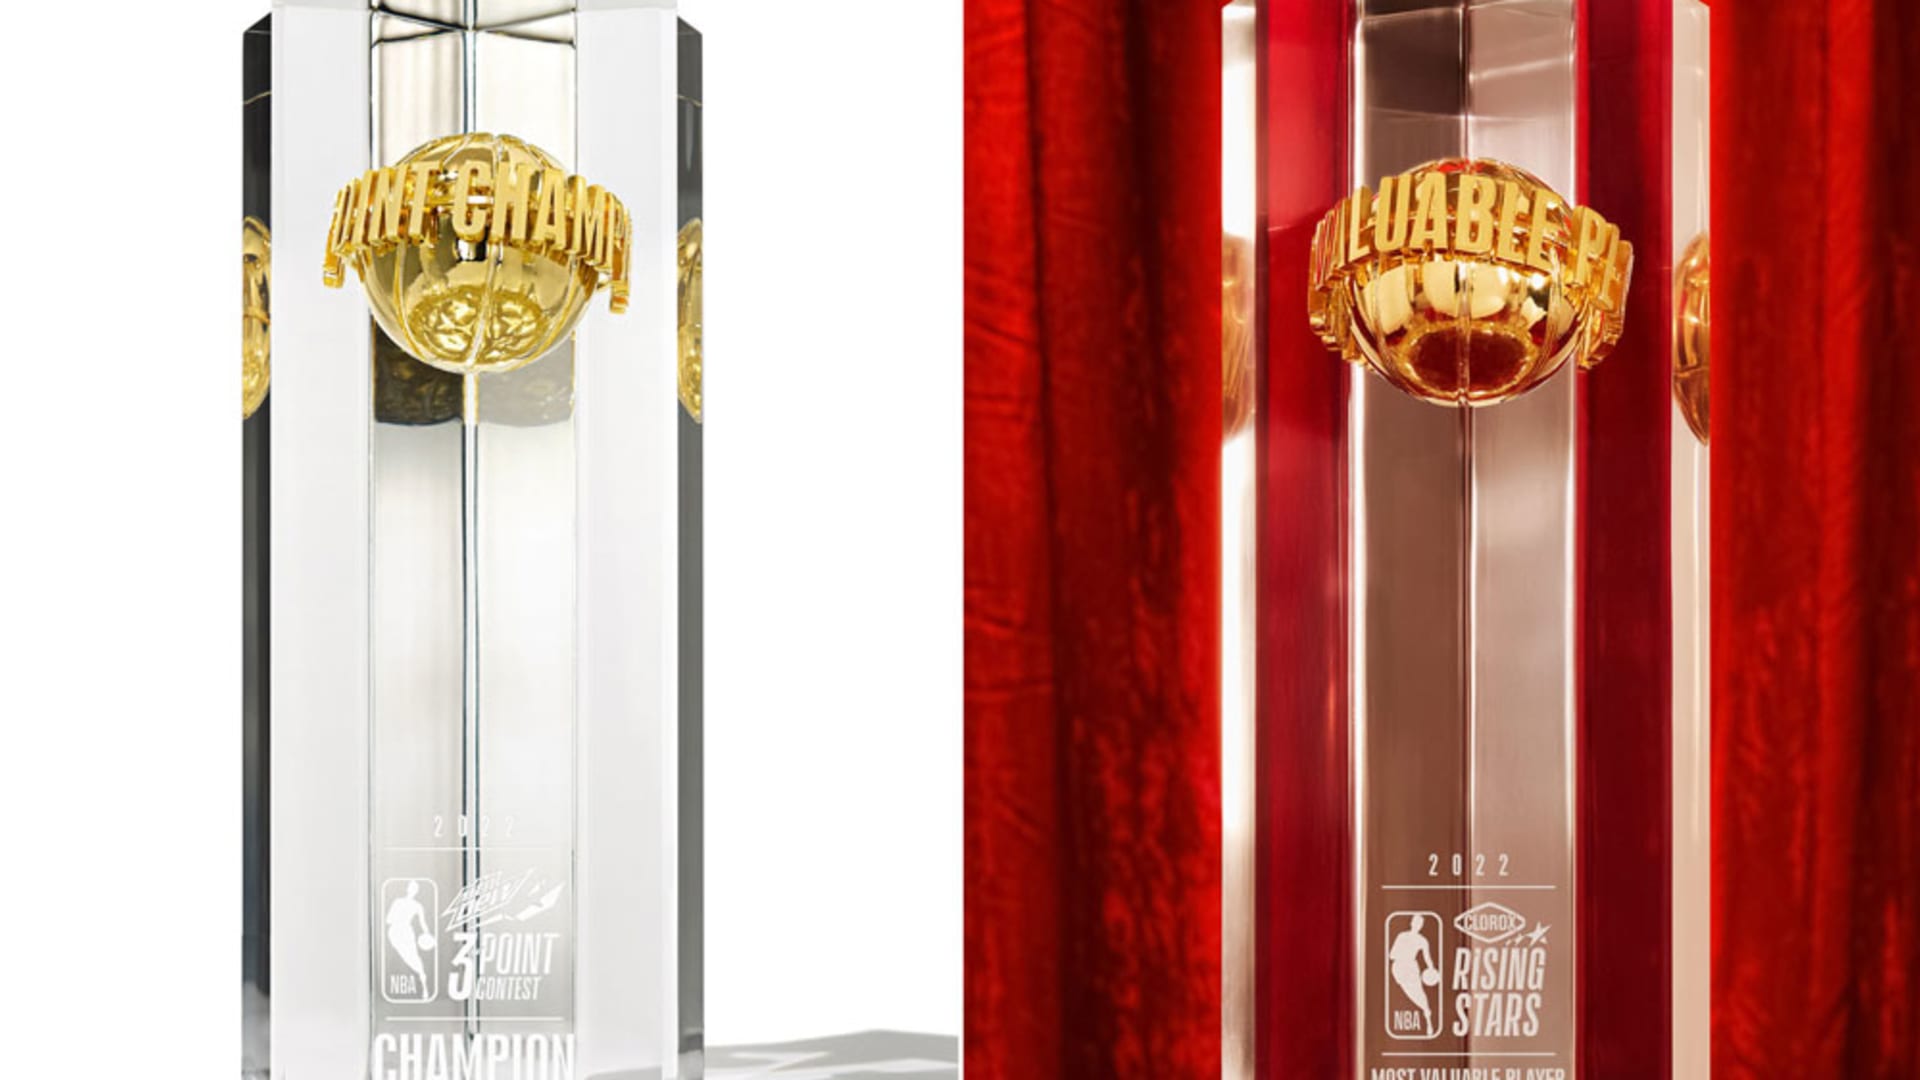 NBA 3 Point and Rising Star trophies